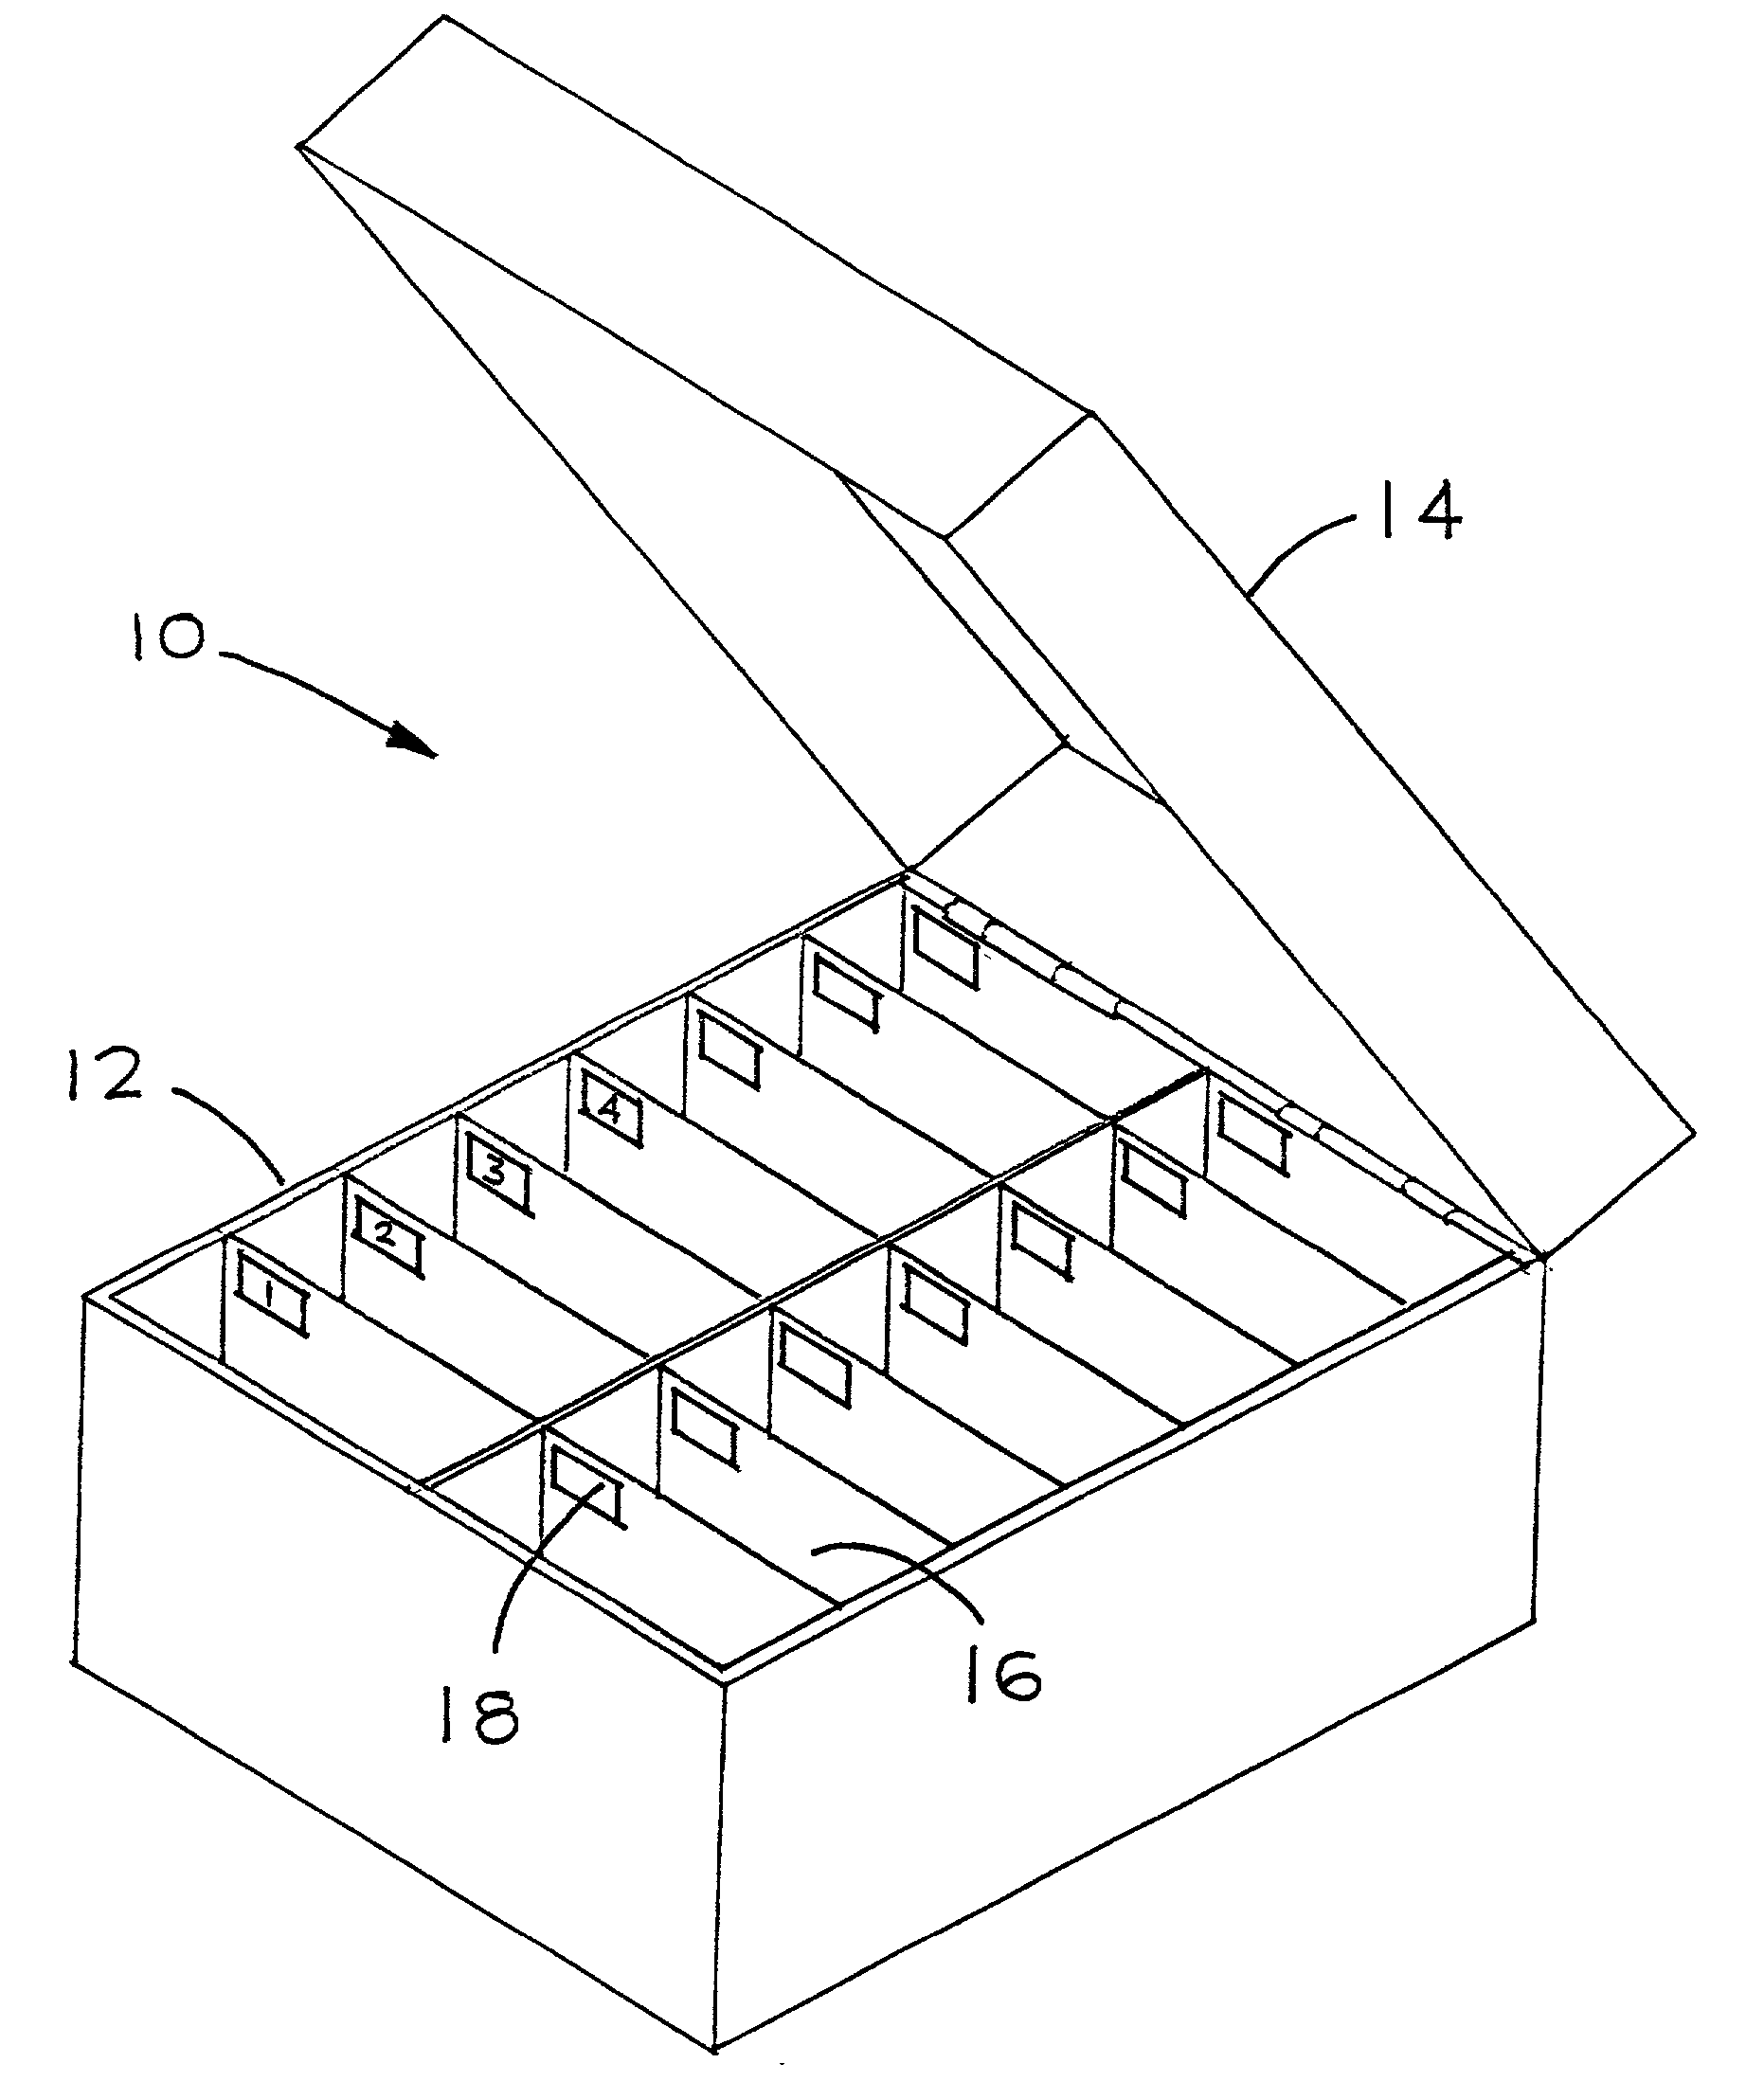 Apparatus for storing, identifying, and retrieving objects